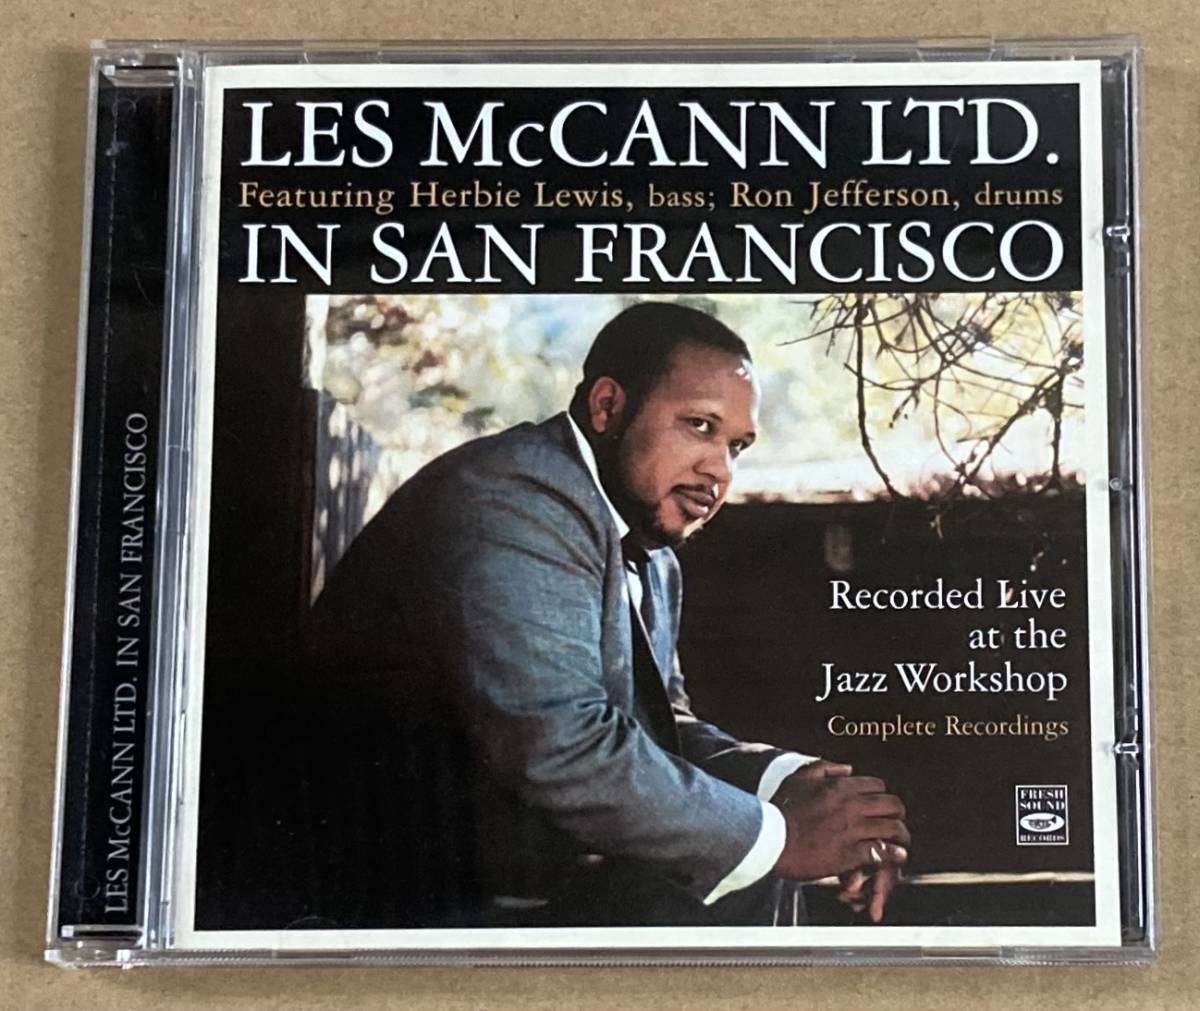 【CD】LES MCCANN／IN SAN FRANCISCO & FROM THE TOP OF THE BARREL《輸入盤》《FRESH SOUND》レス マッキャン_画像1